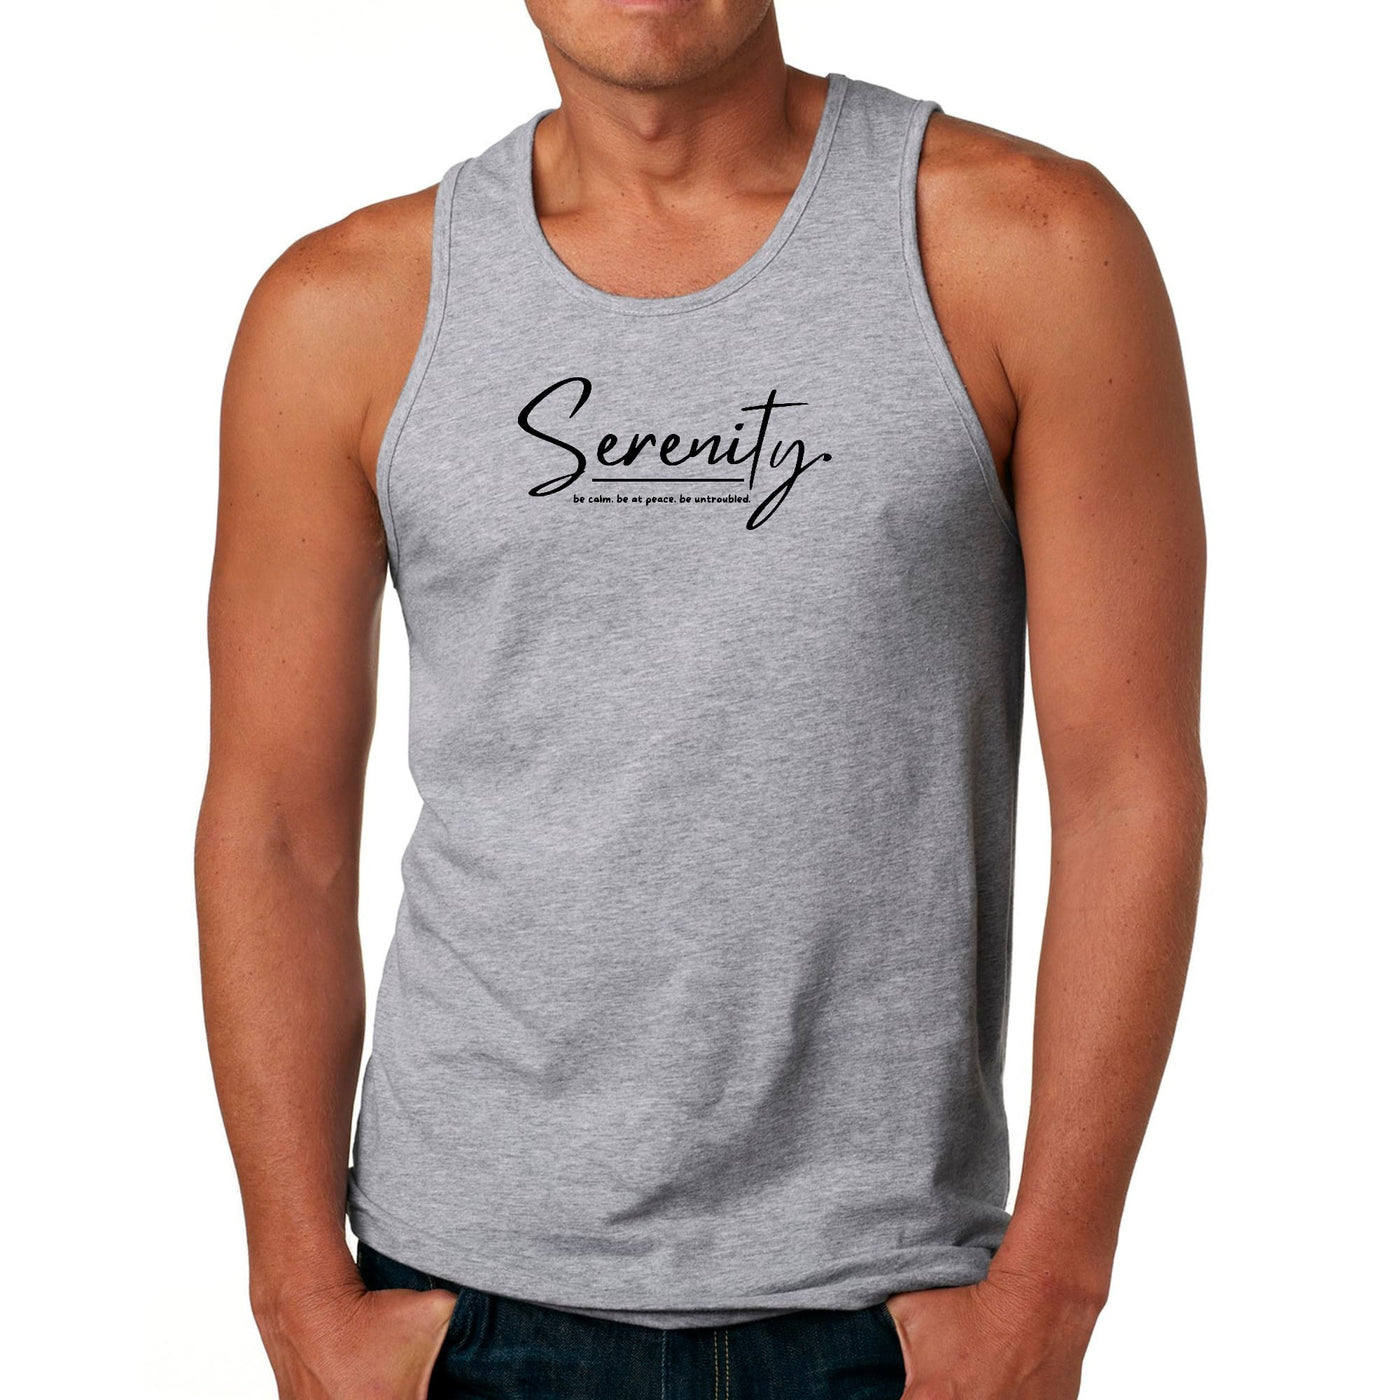 Mens Fitness Tank Top Graphic T-shirt Serenity - Be Calm Be At Peace - Mens